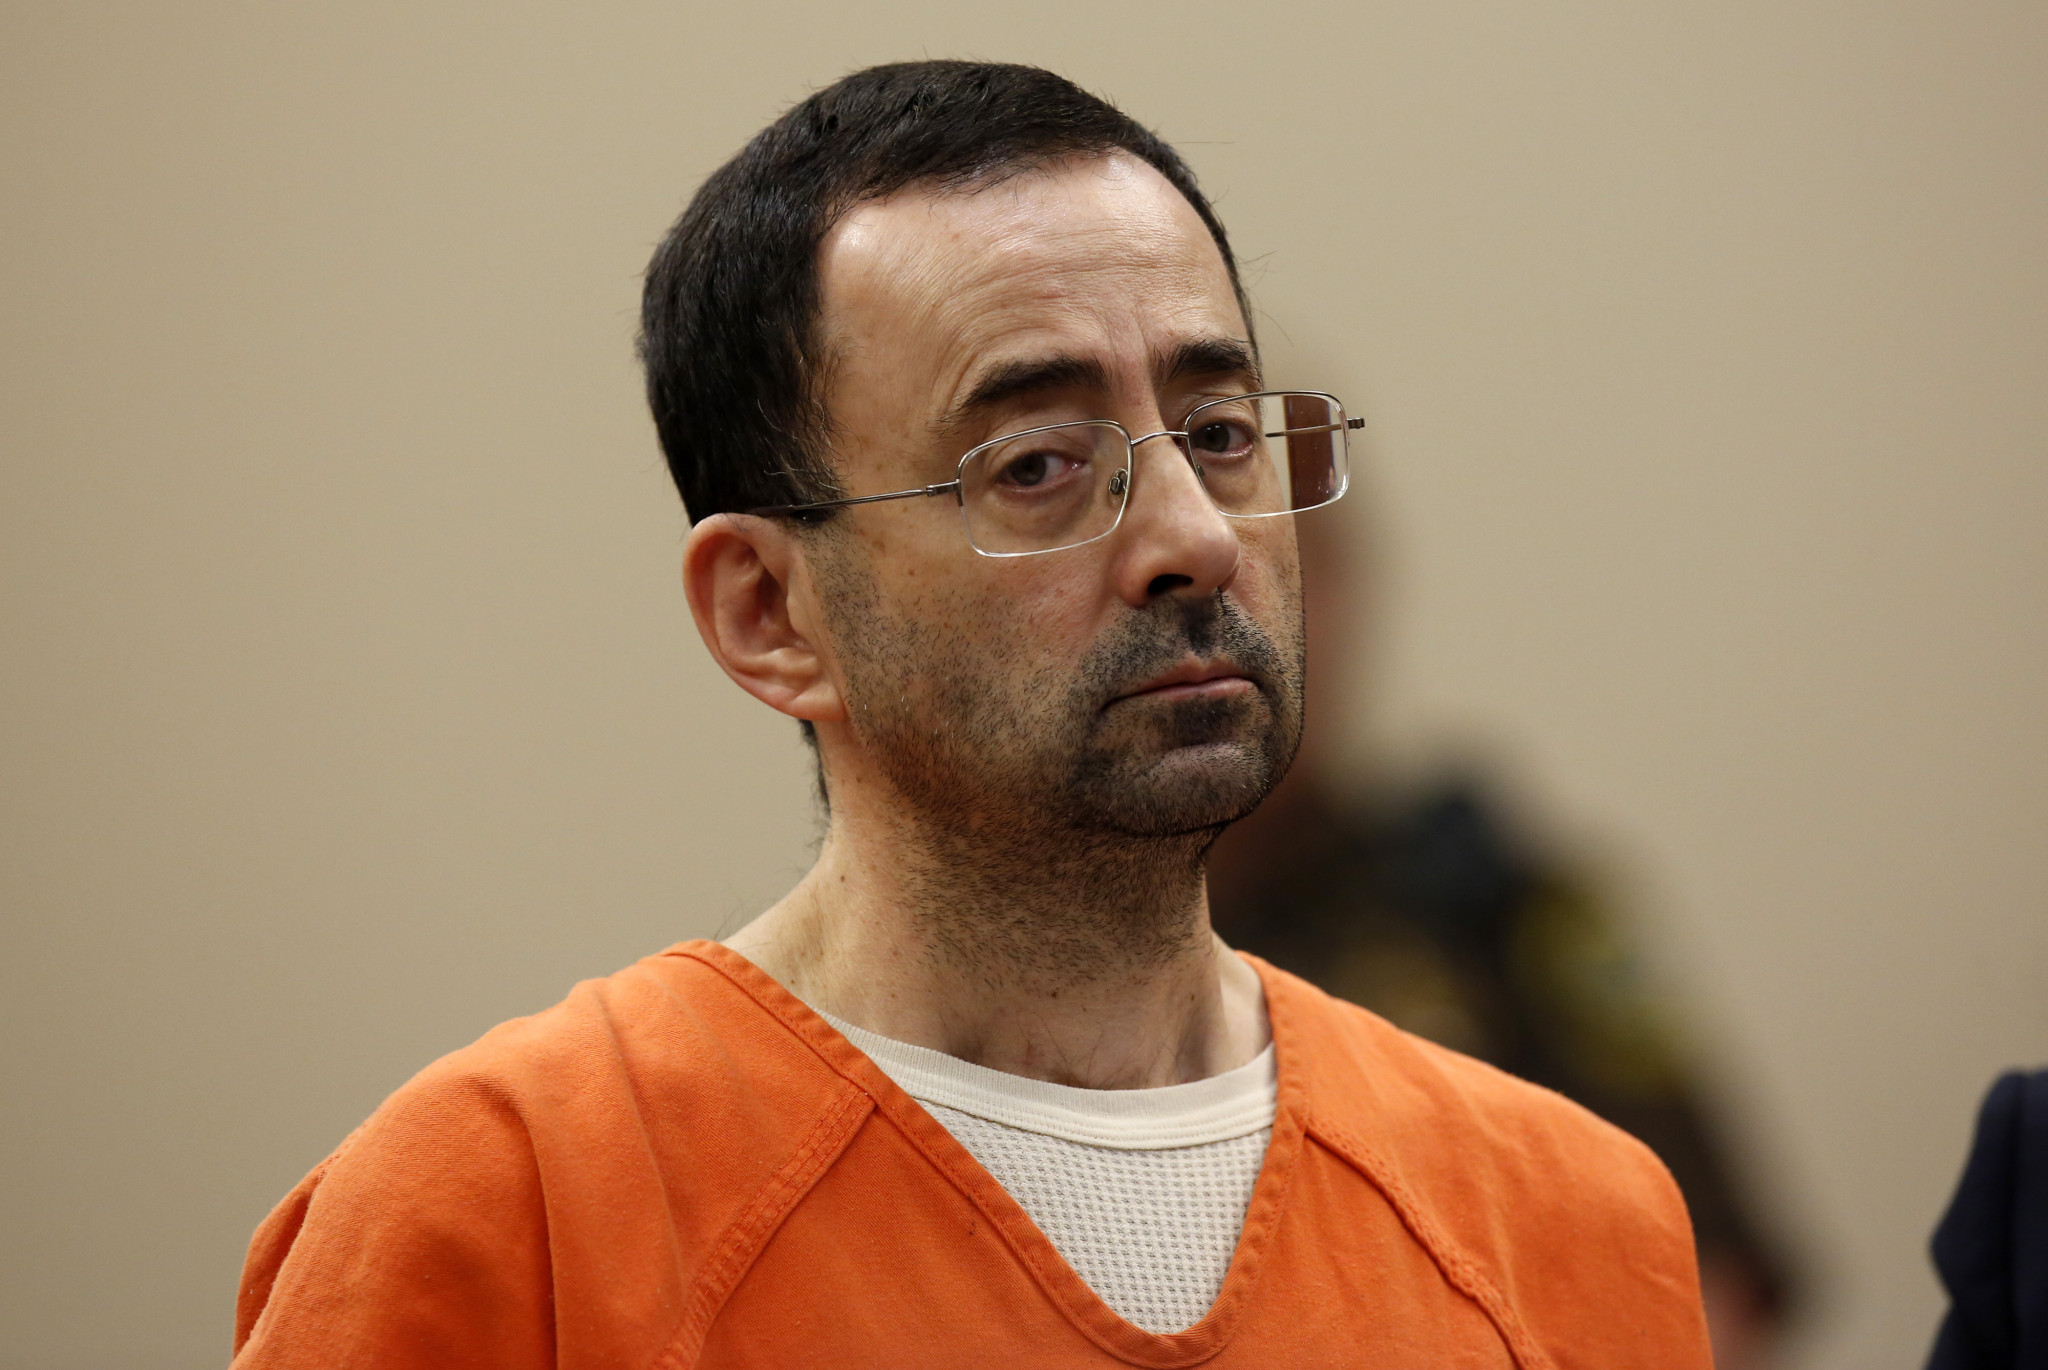 Former USA Gymnastics team doctor facing 25 years in prison after pleading guilty to sexual assault charges